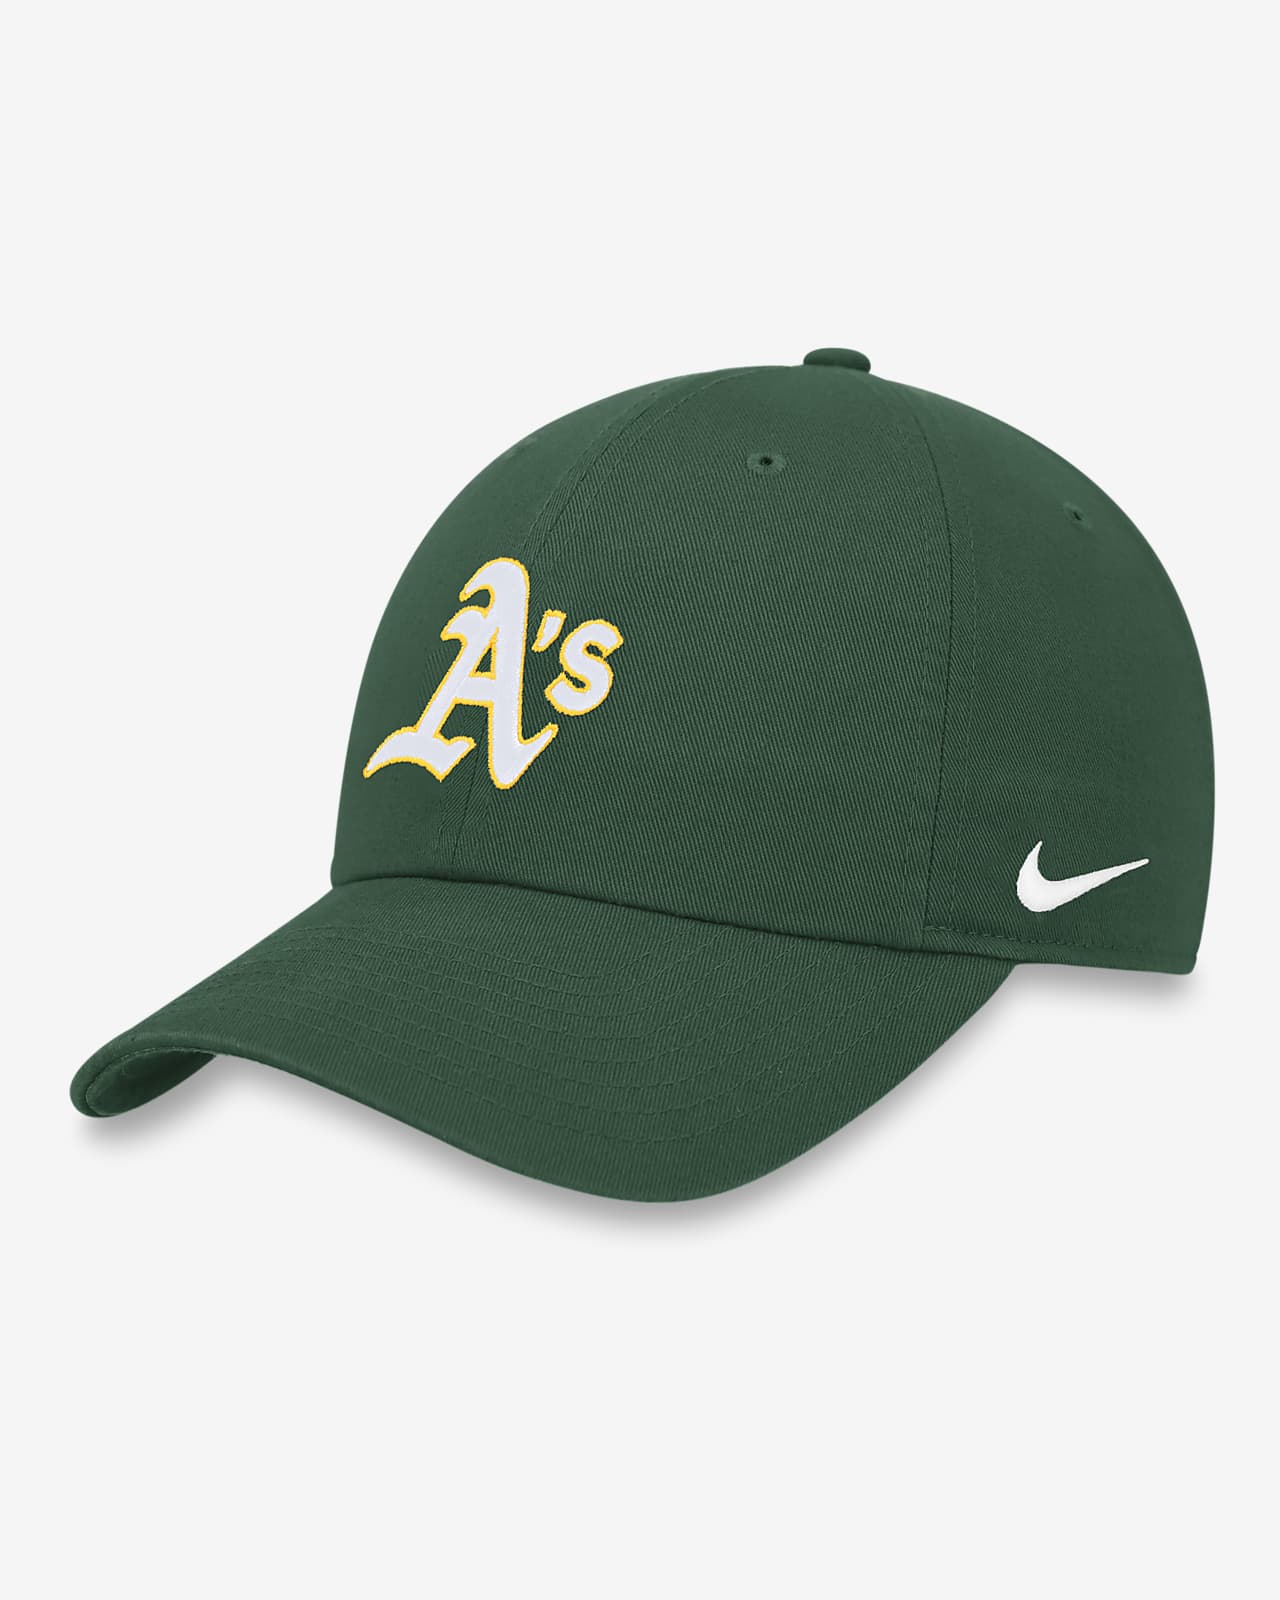 Infant Oakland Athletics New Era Green My First 9FIFTY Hat